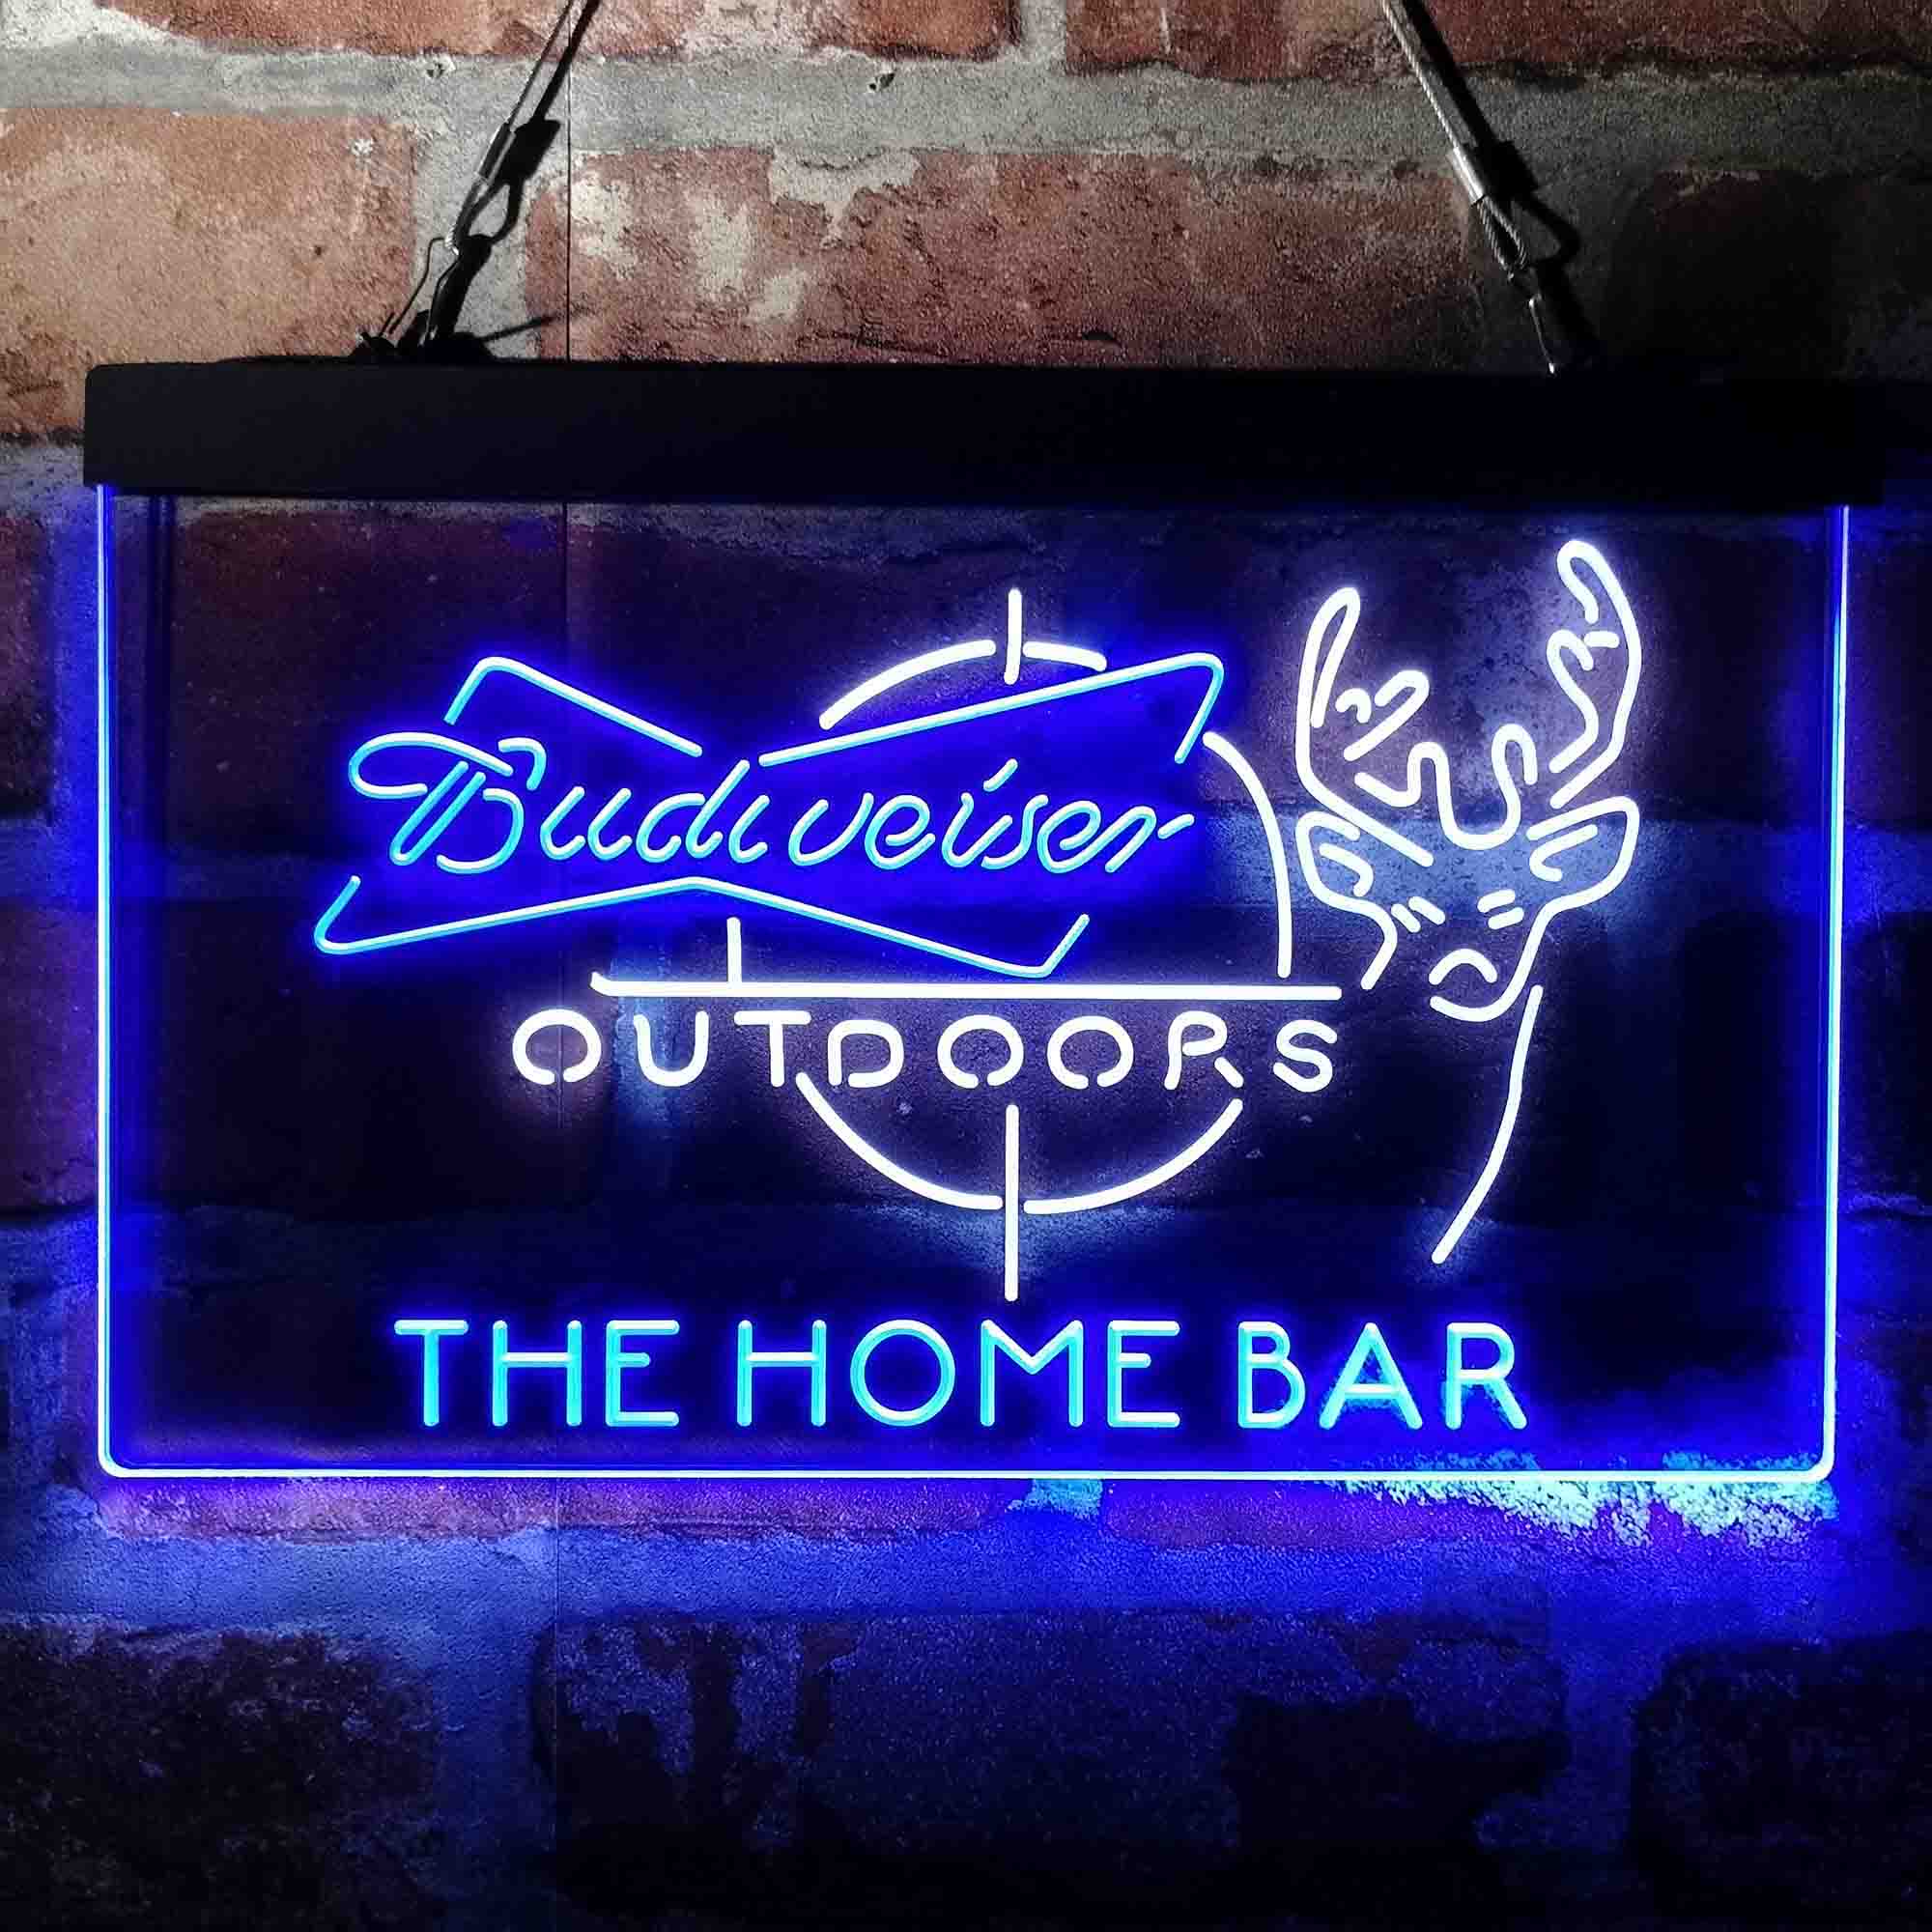 Personalized Budweiser Beer Bar Neon-Like LED Sign - Custom Wall Decor Gift